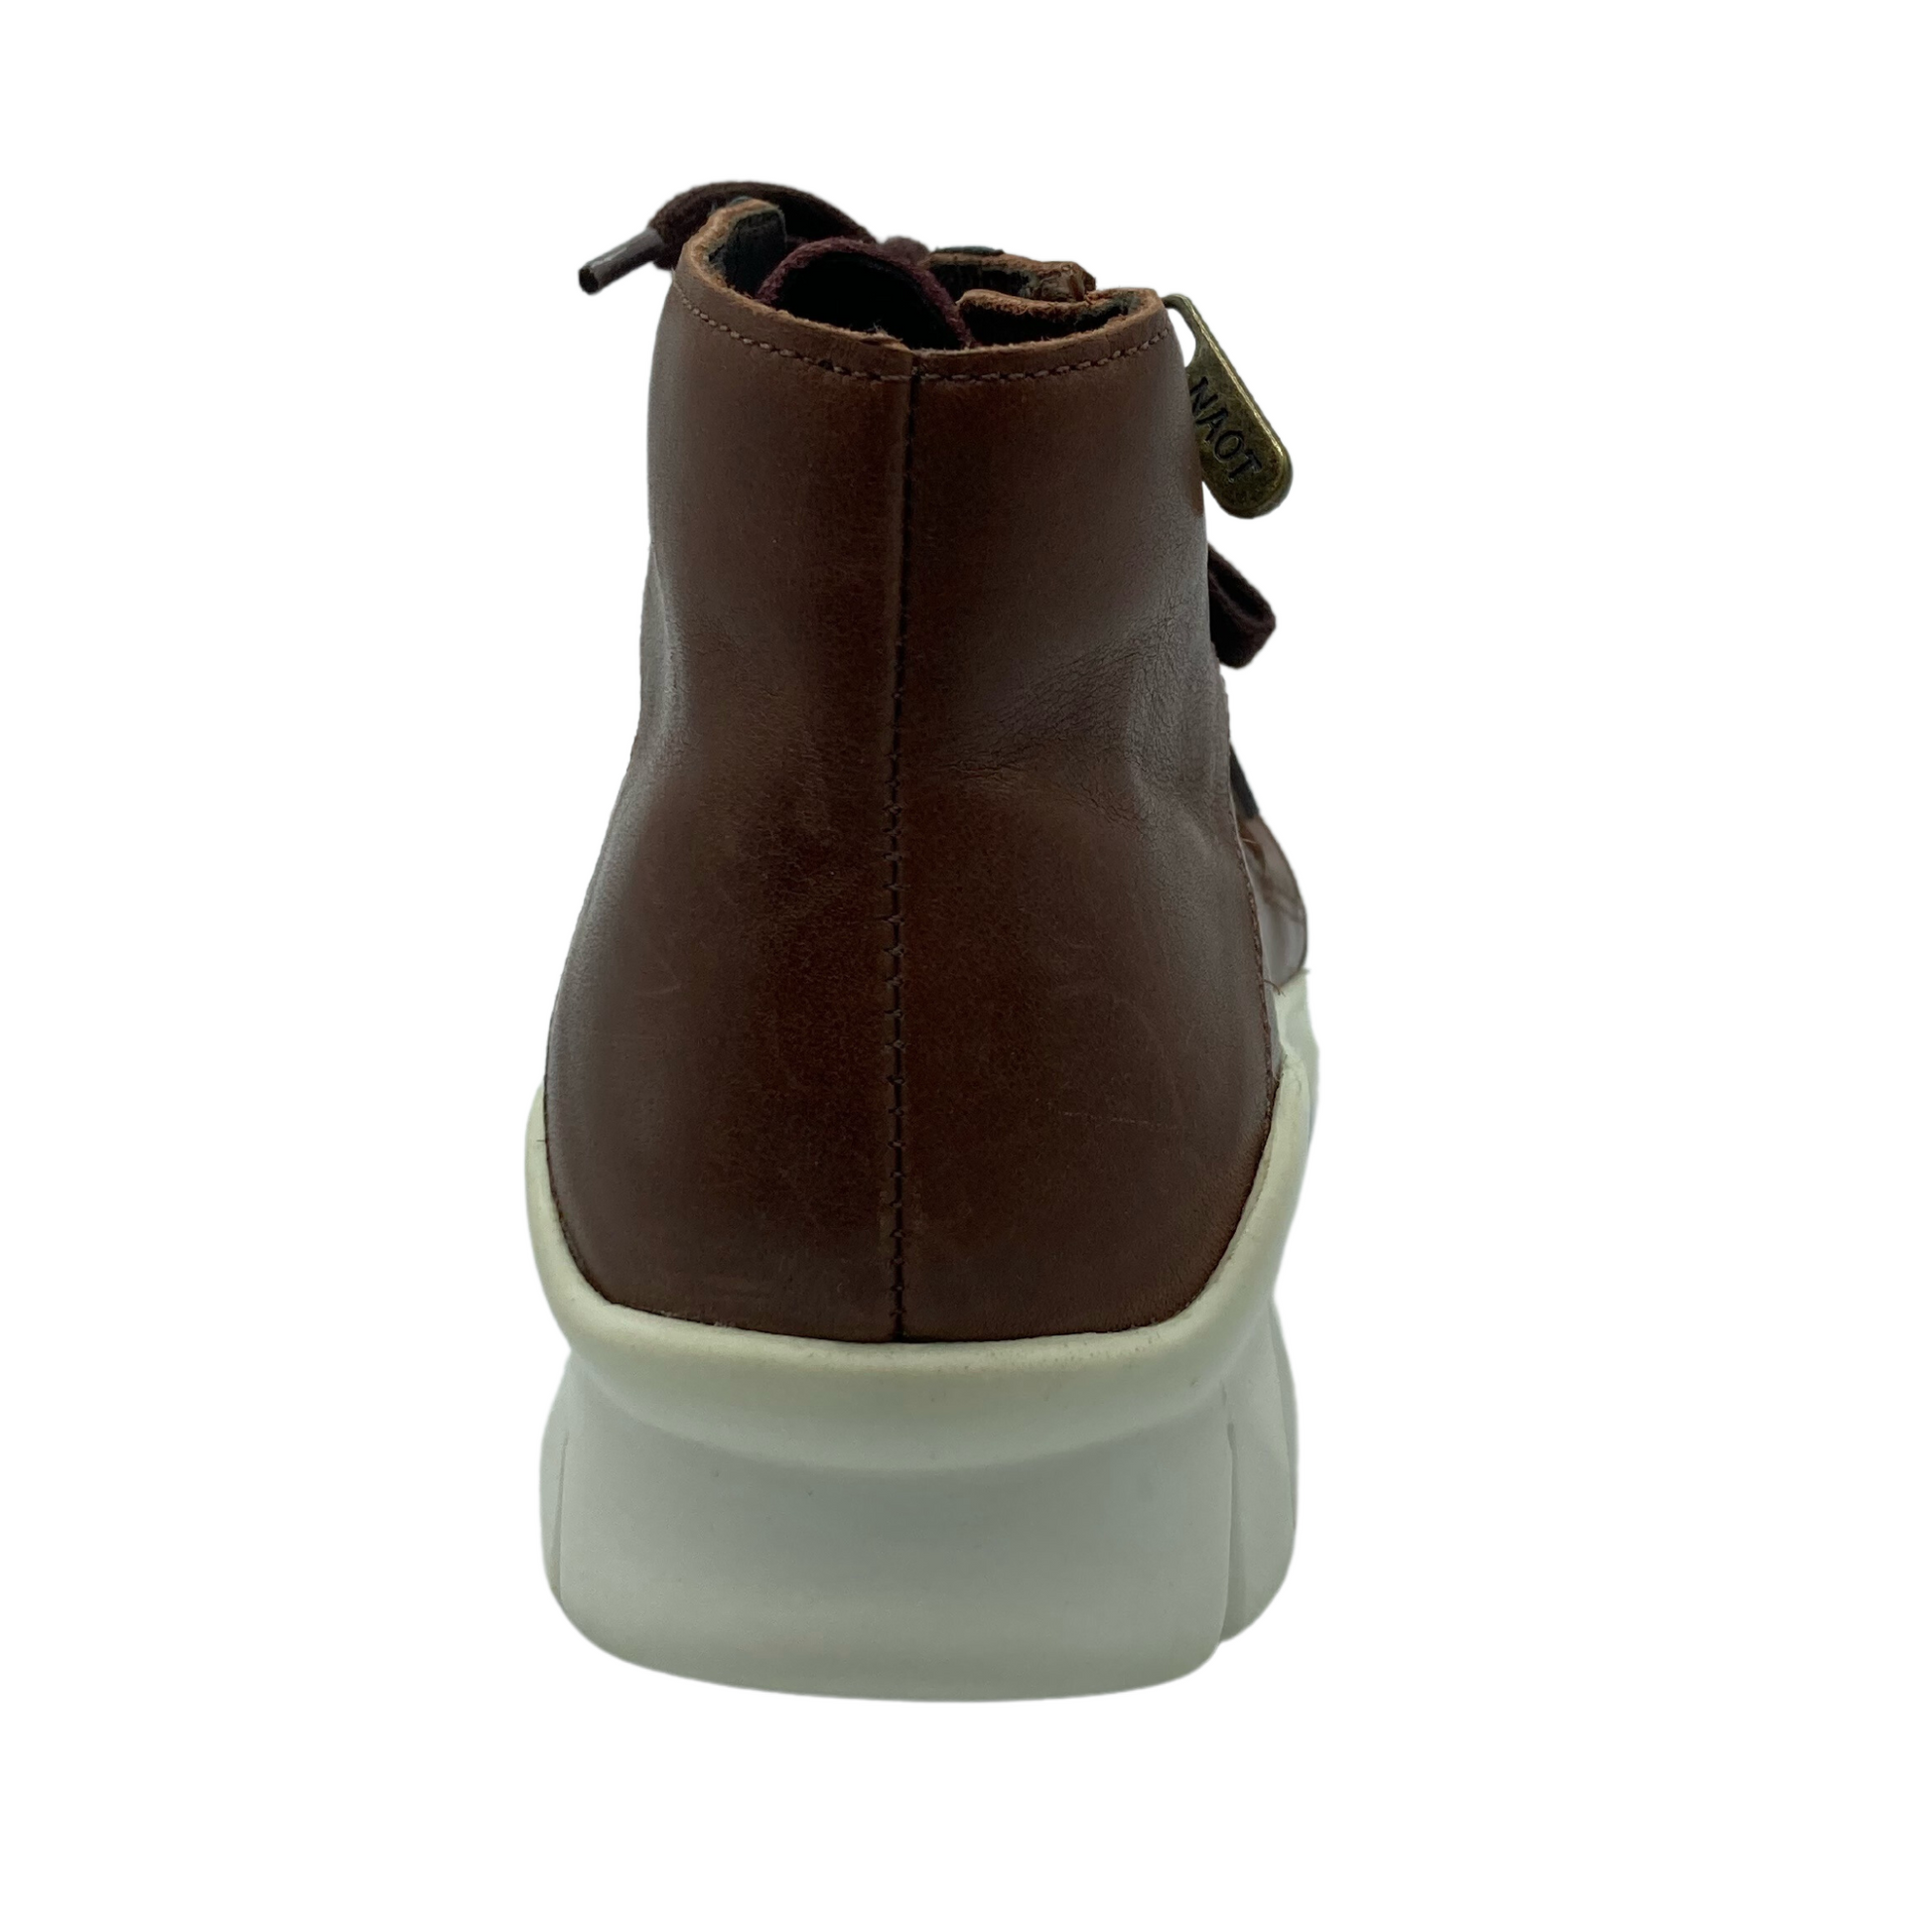 Heel view of back of brown leather sneaker with white sole